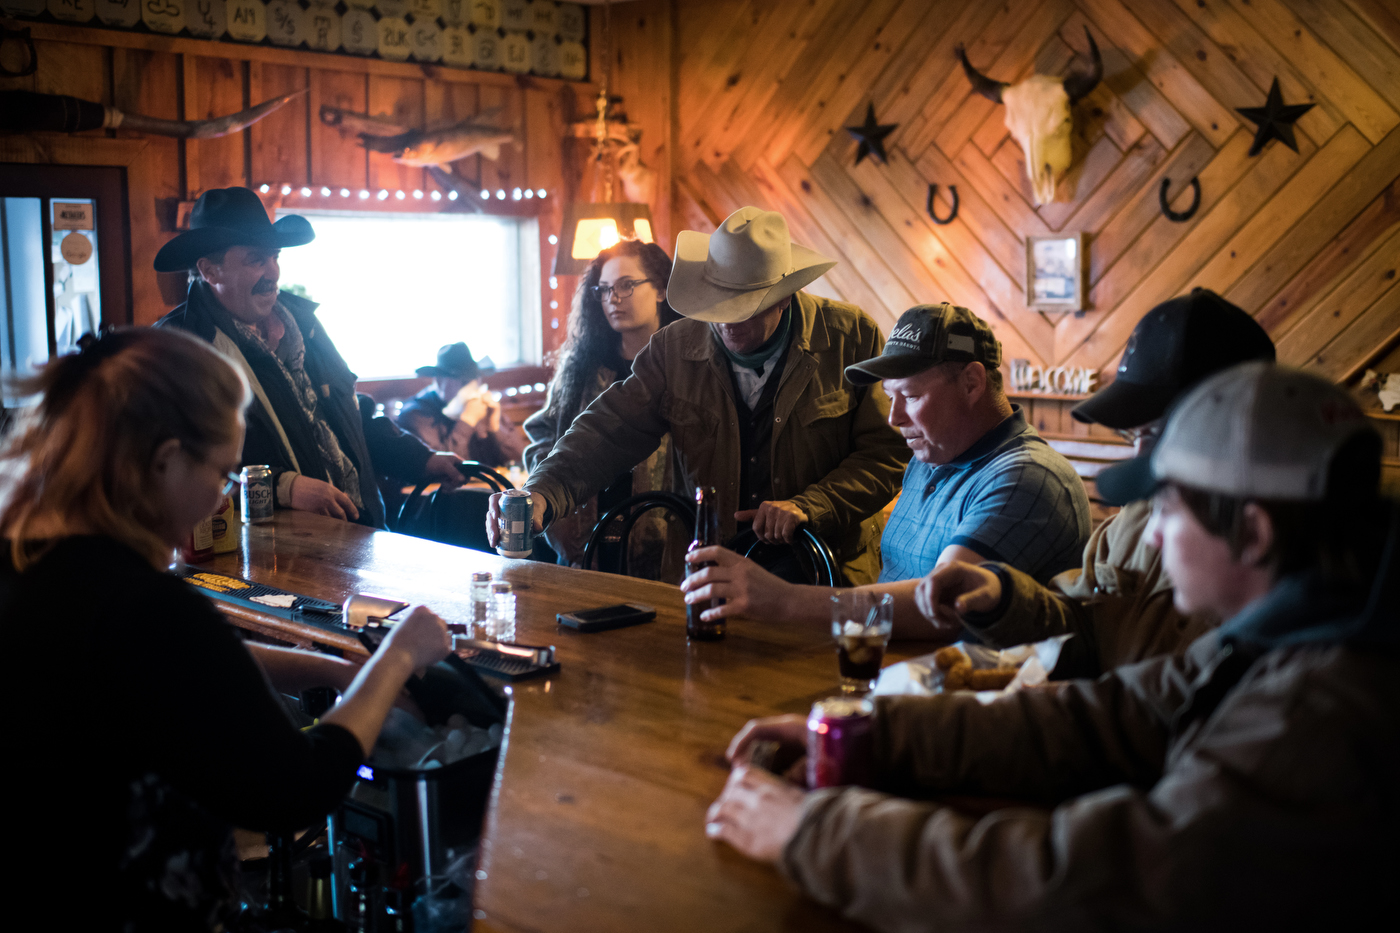  45º31'48.9"N, 102º12'59.8"W. 123 miles from the nearest McDonald's.  Men drink at Smoky's Bar and Grill during an uncommon break during the spring calving season in Meadow, SD on April 15, 2018. Winter has dragged on into mid-April in South Dakota a